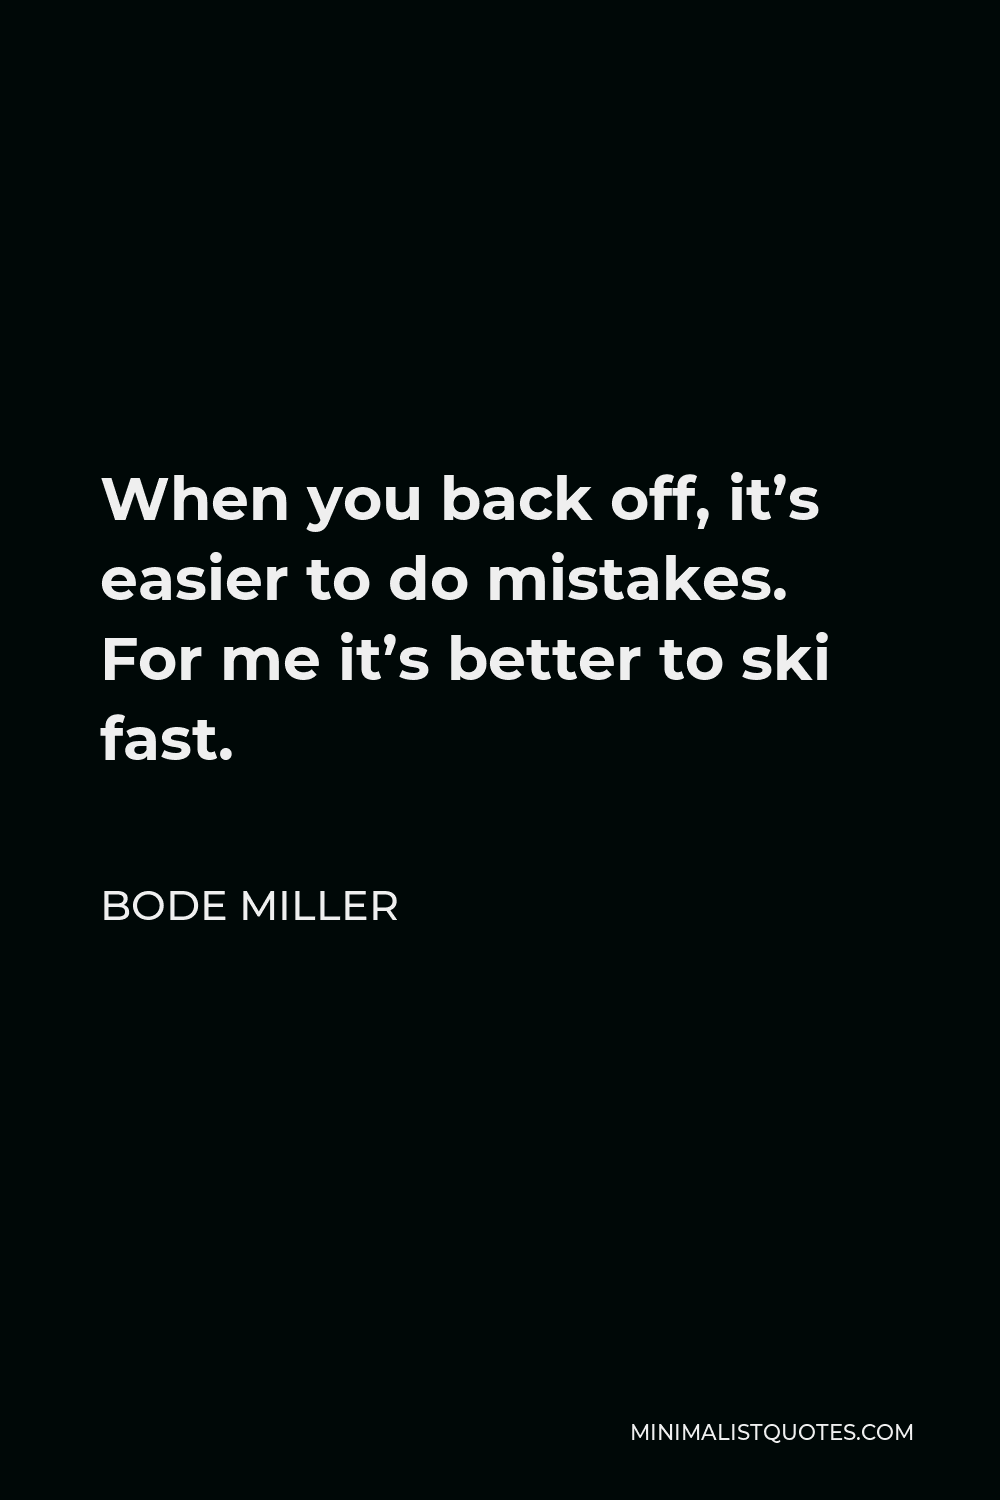 Bode Miller Quote - When you back off, it’s easier to do mistakes. For me it’s better to ski fast.